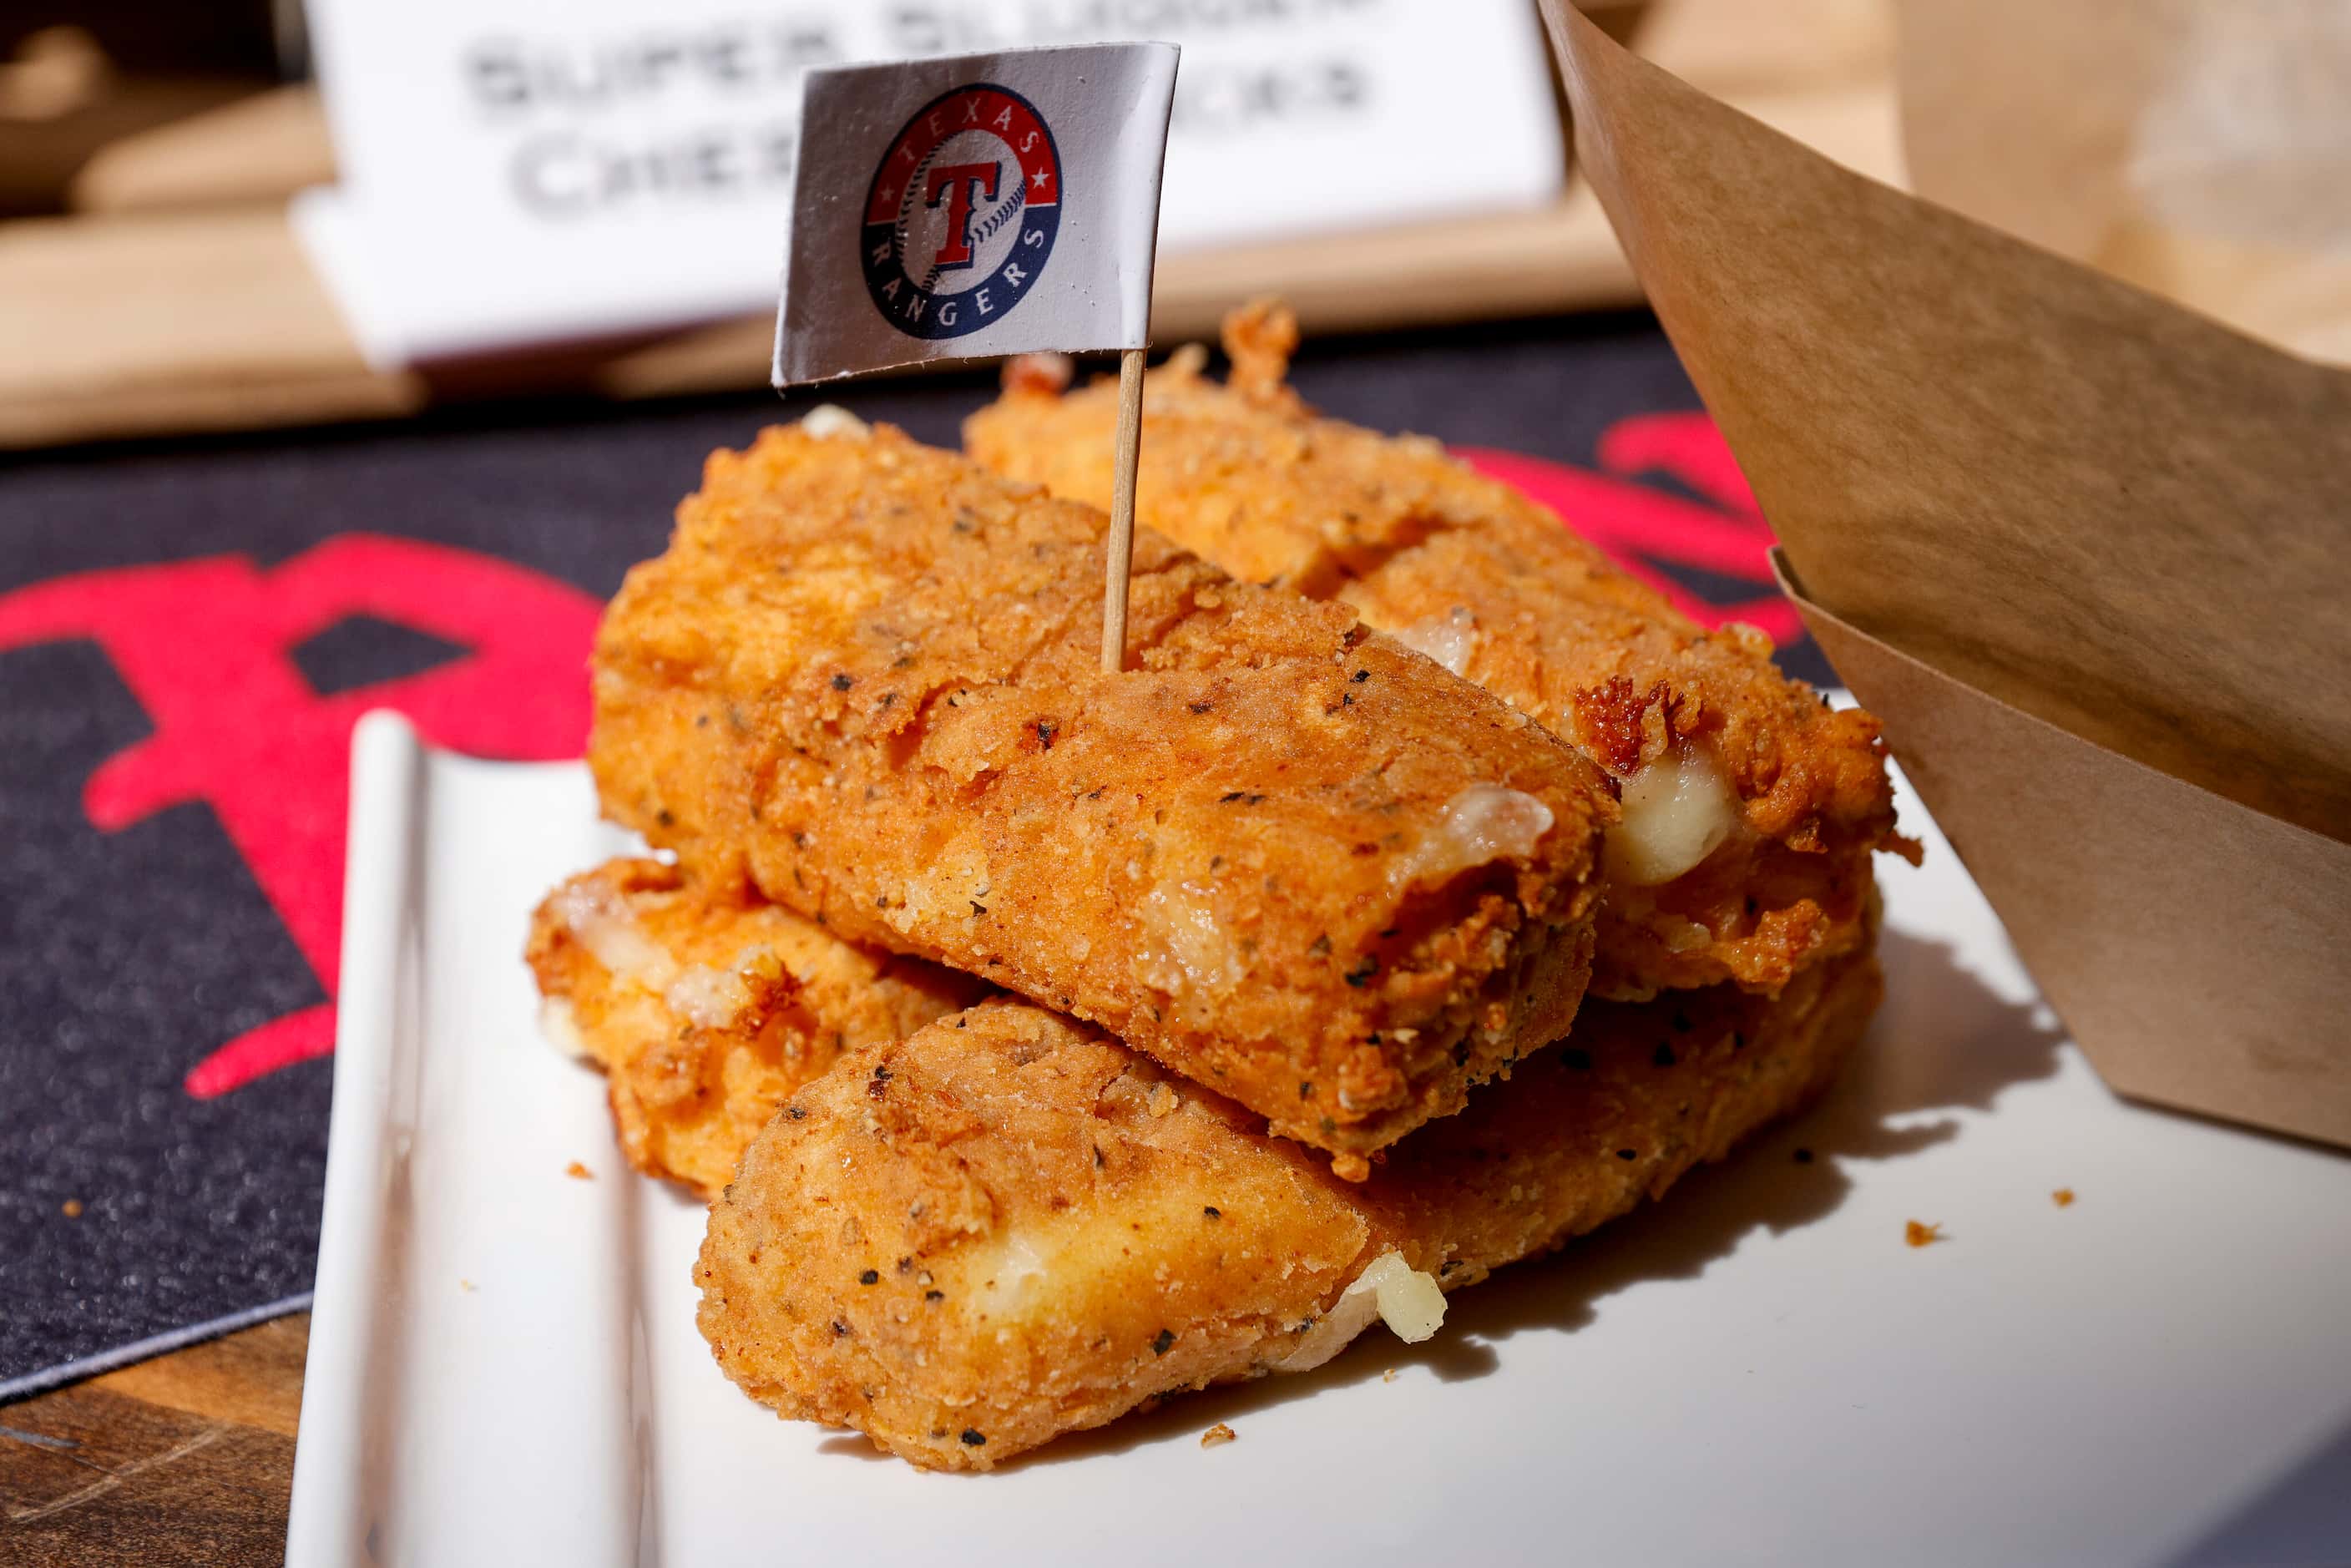 The Texas Rangers' new Super Slugger Cheese Sticks are giant — which concessions company...